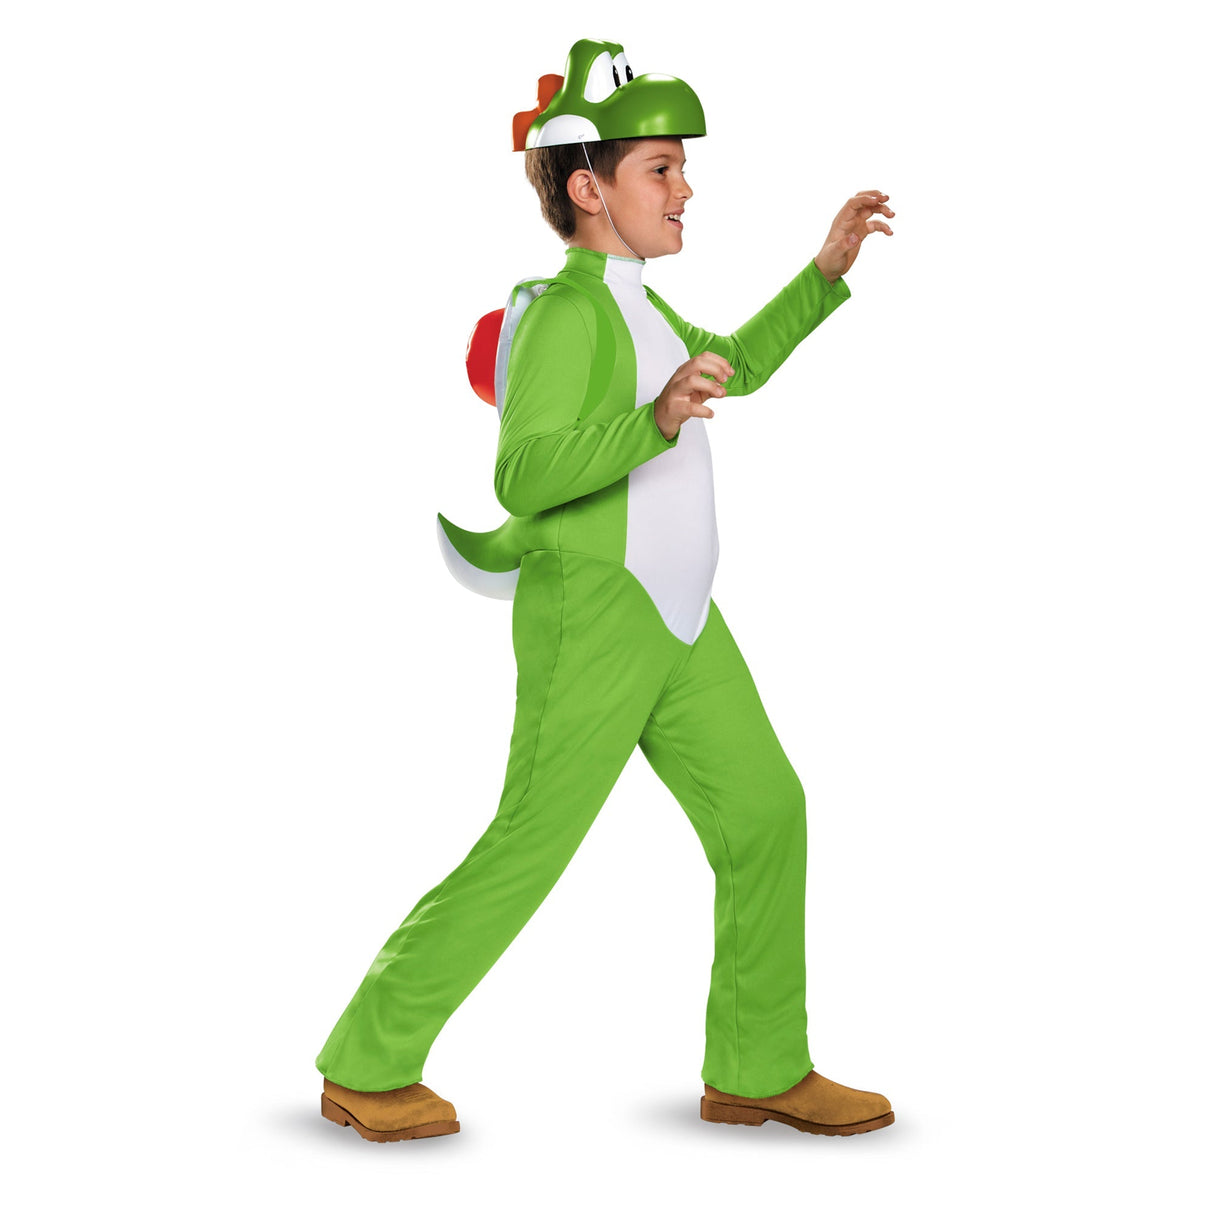 TOY-SPORT Costumes Yoshi Deluxe Costume for Kids, Super Mario Bros.